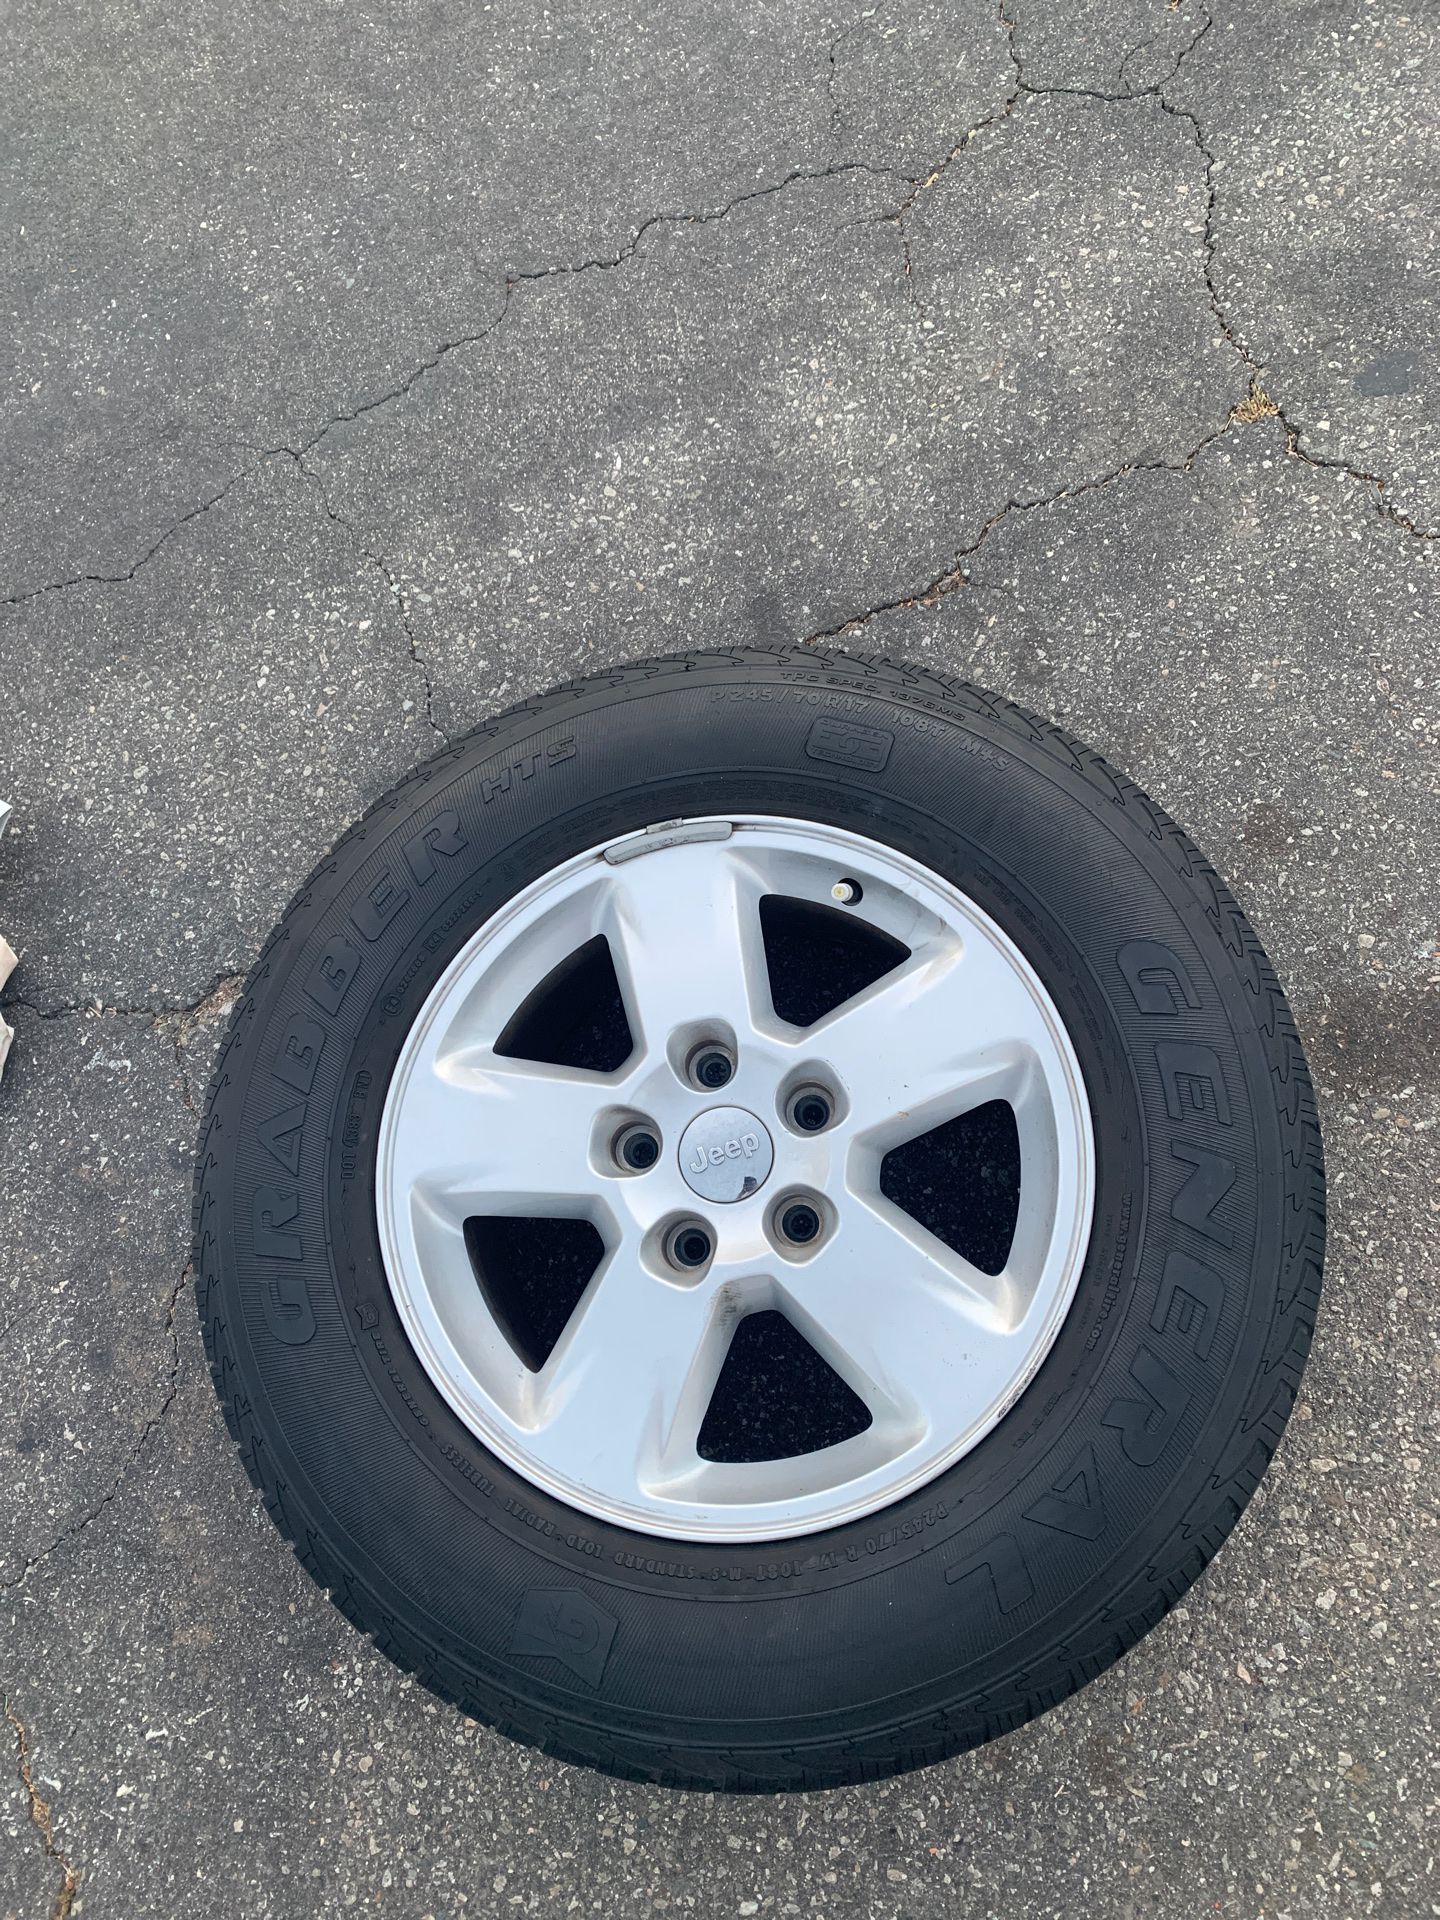 2012 Jeep Laredo wheels and tires for sale. $180 all 4